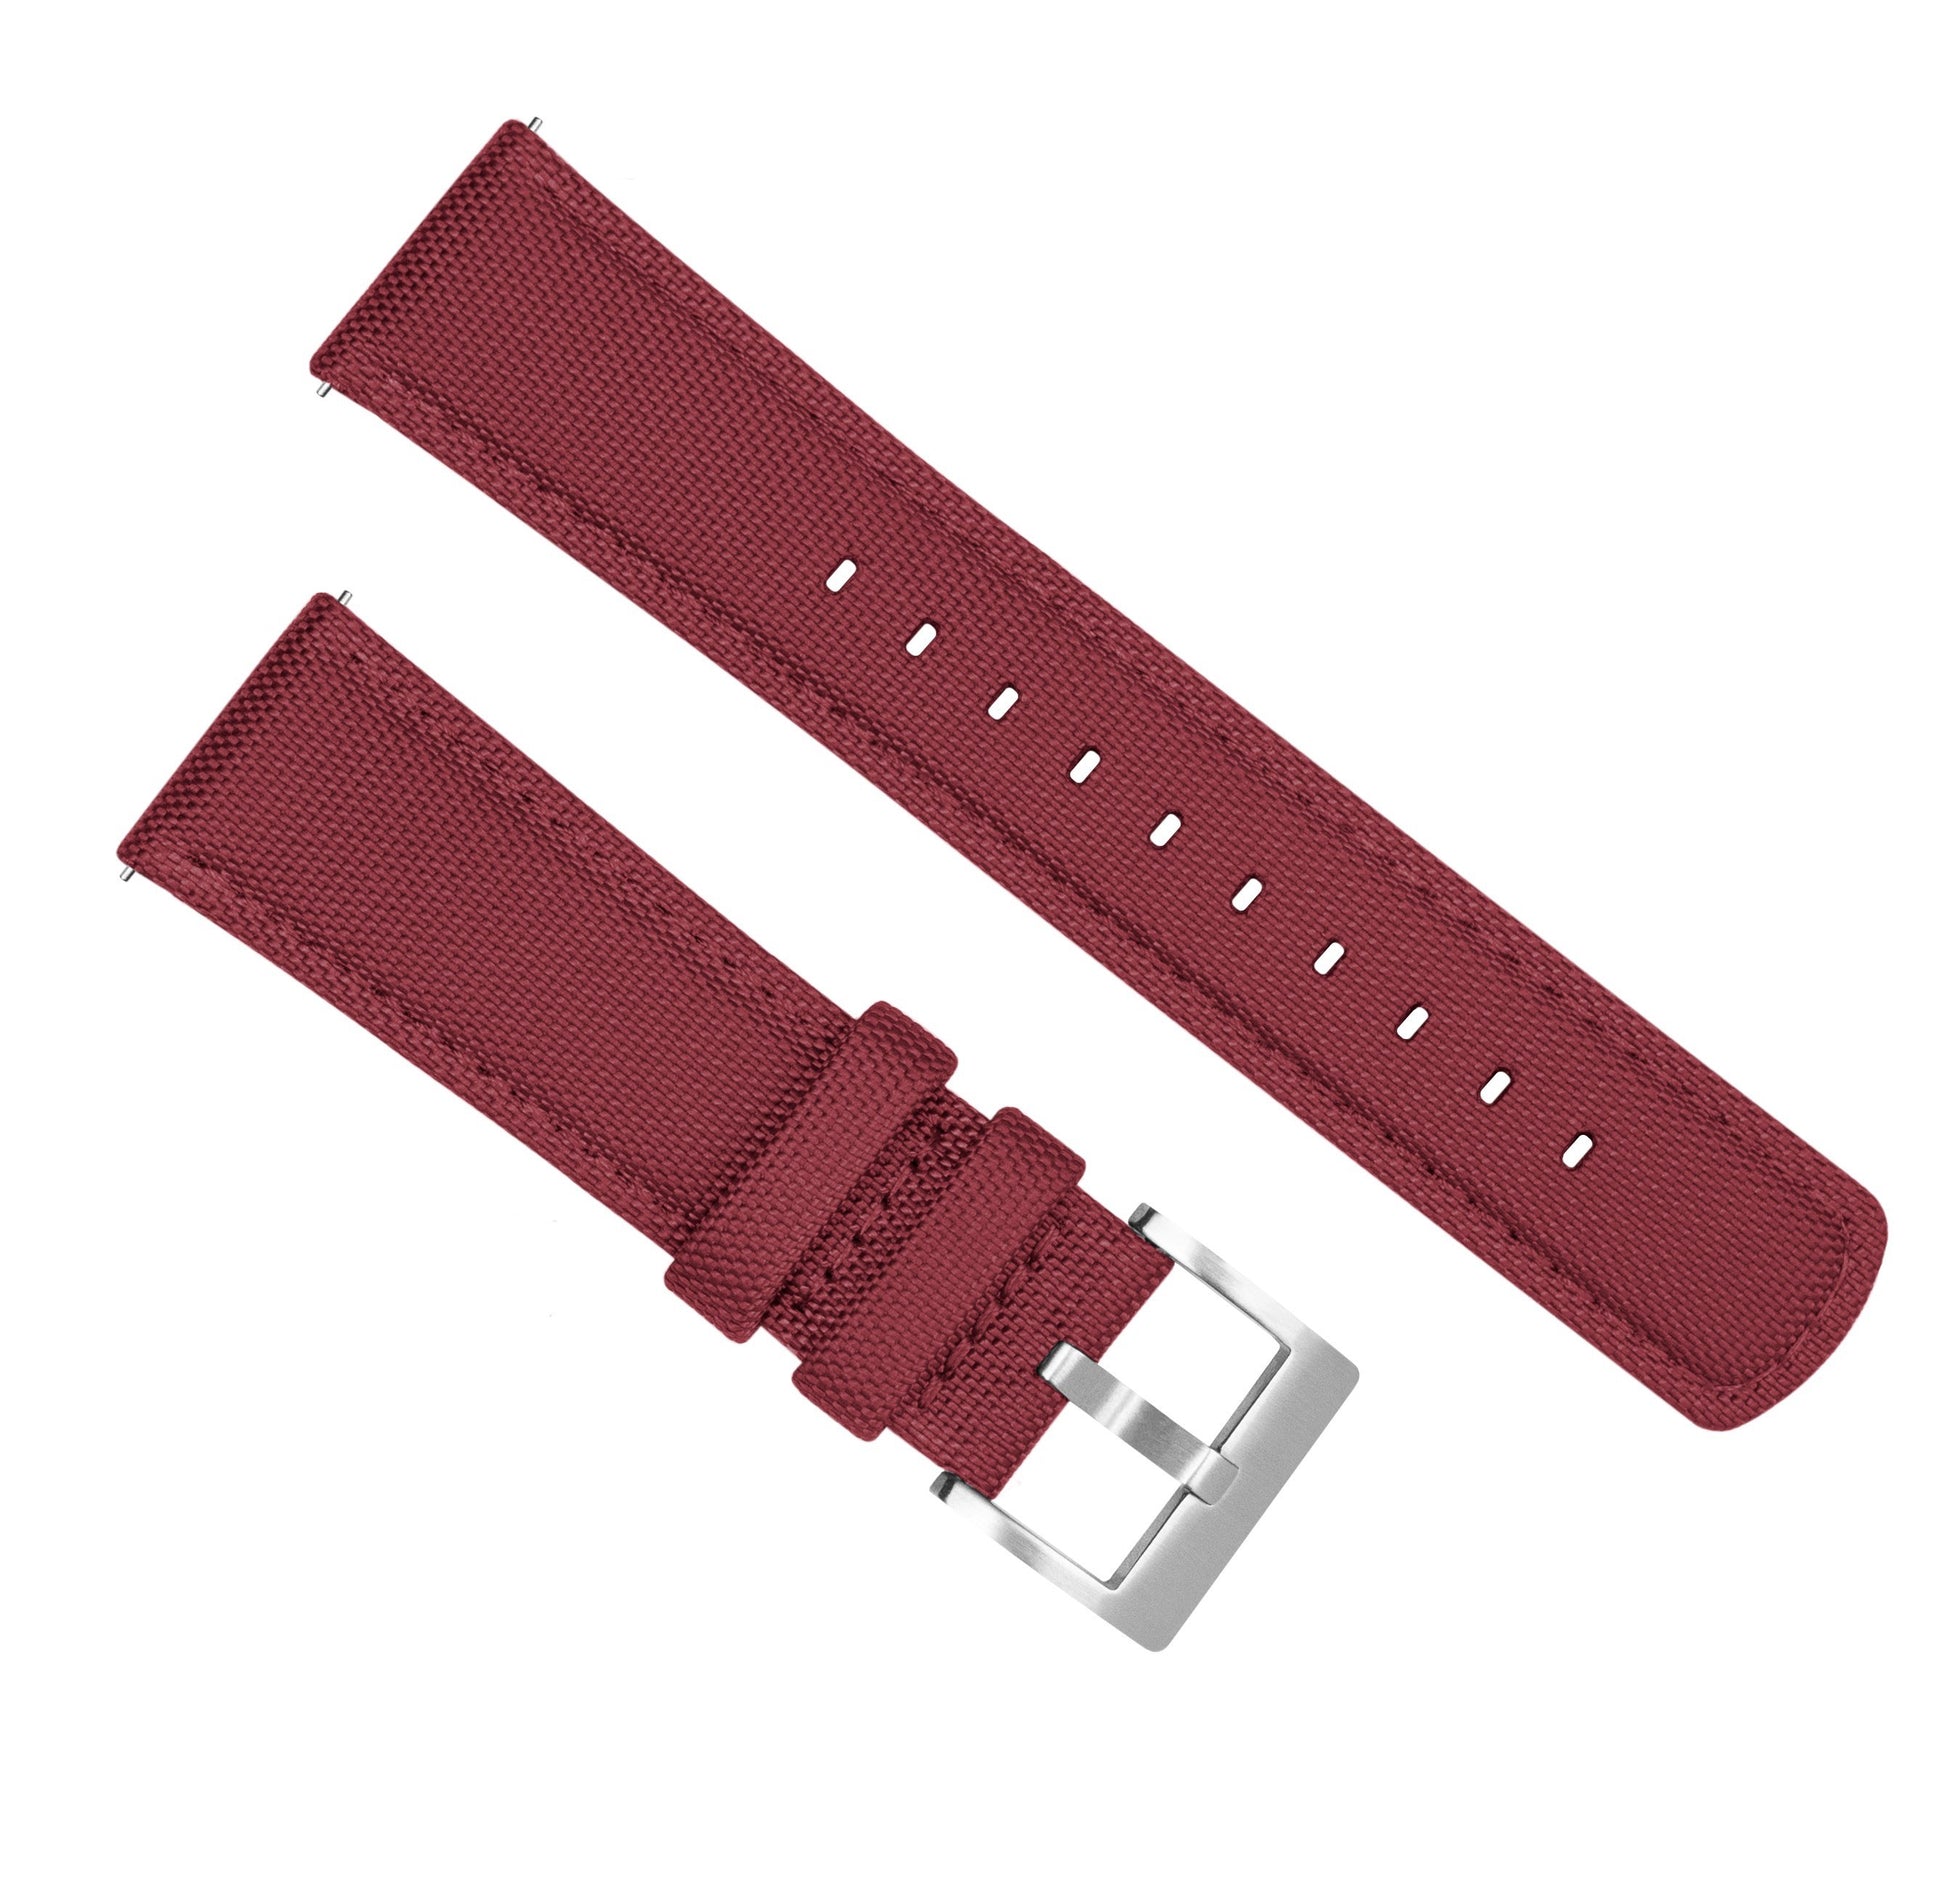 Withings Nokia Activité and Steel HR | Sailcloth Quick Release | Raspberry Red - Barton Watch Bands